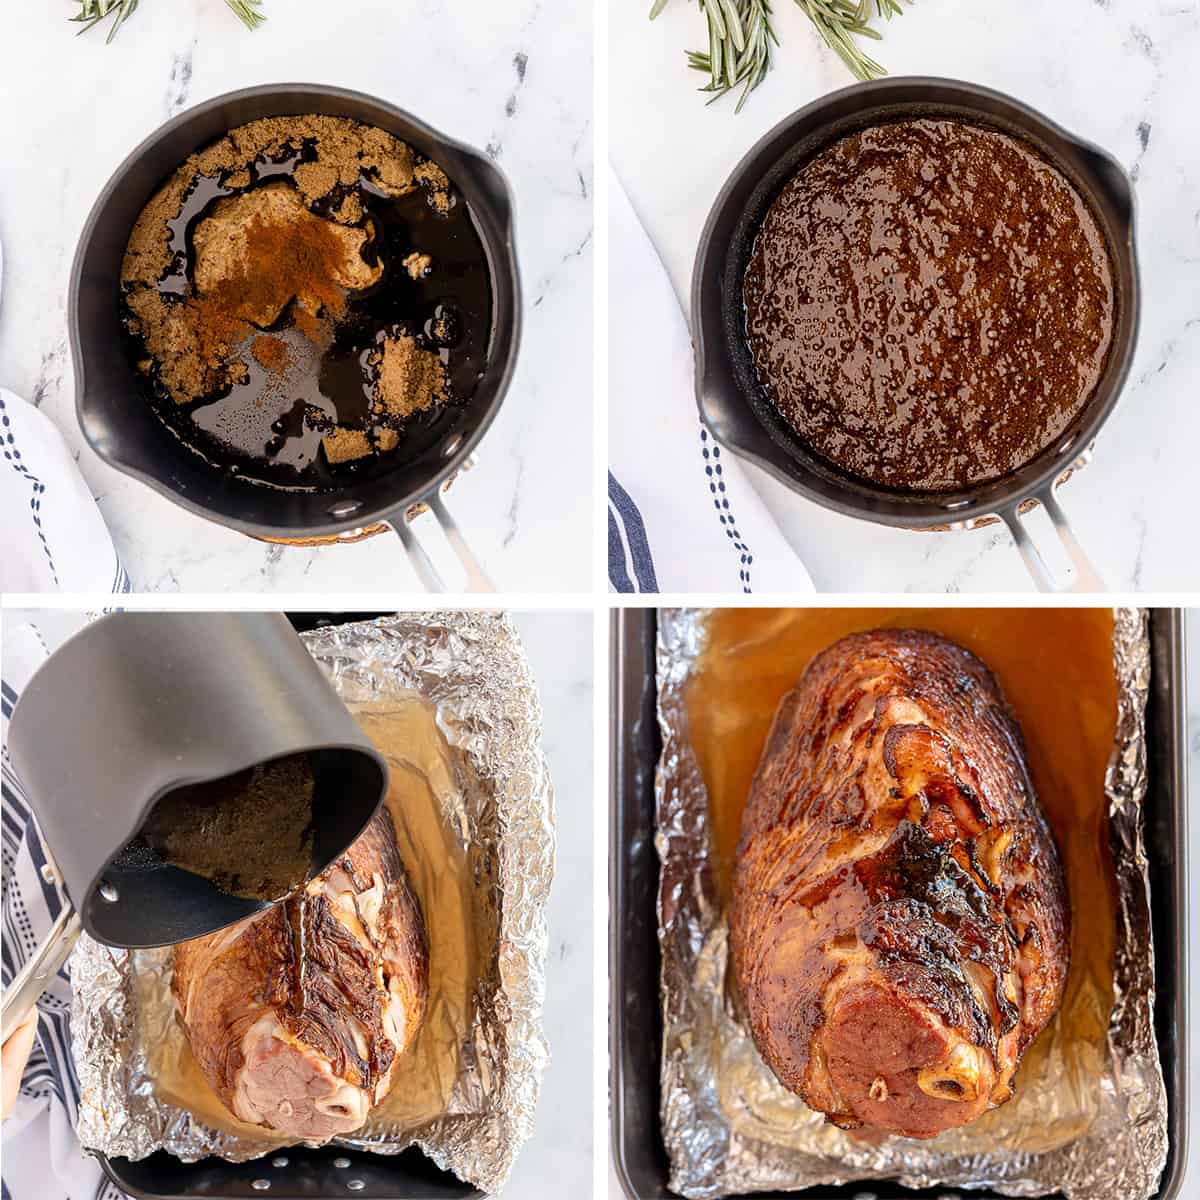 Glaze ingredients in a saucepan and being poured over a ham on foil.